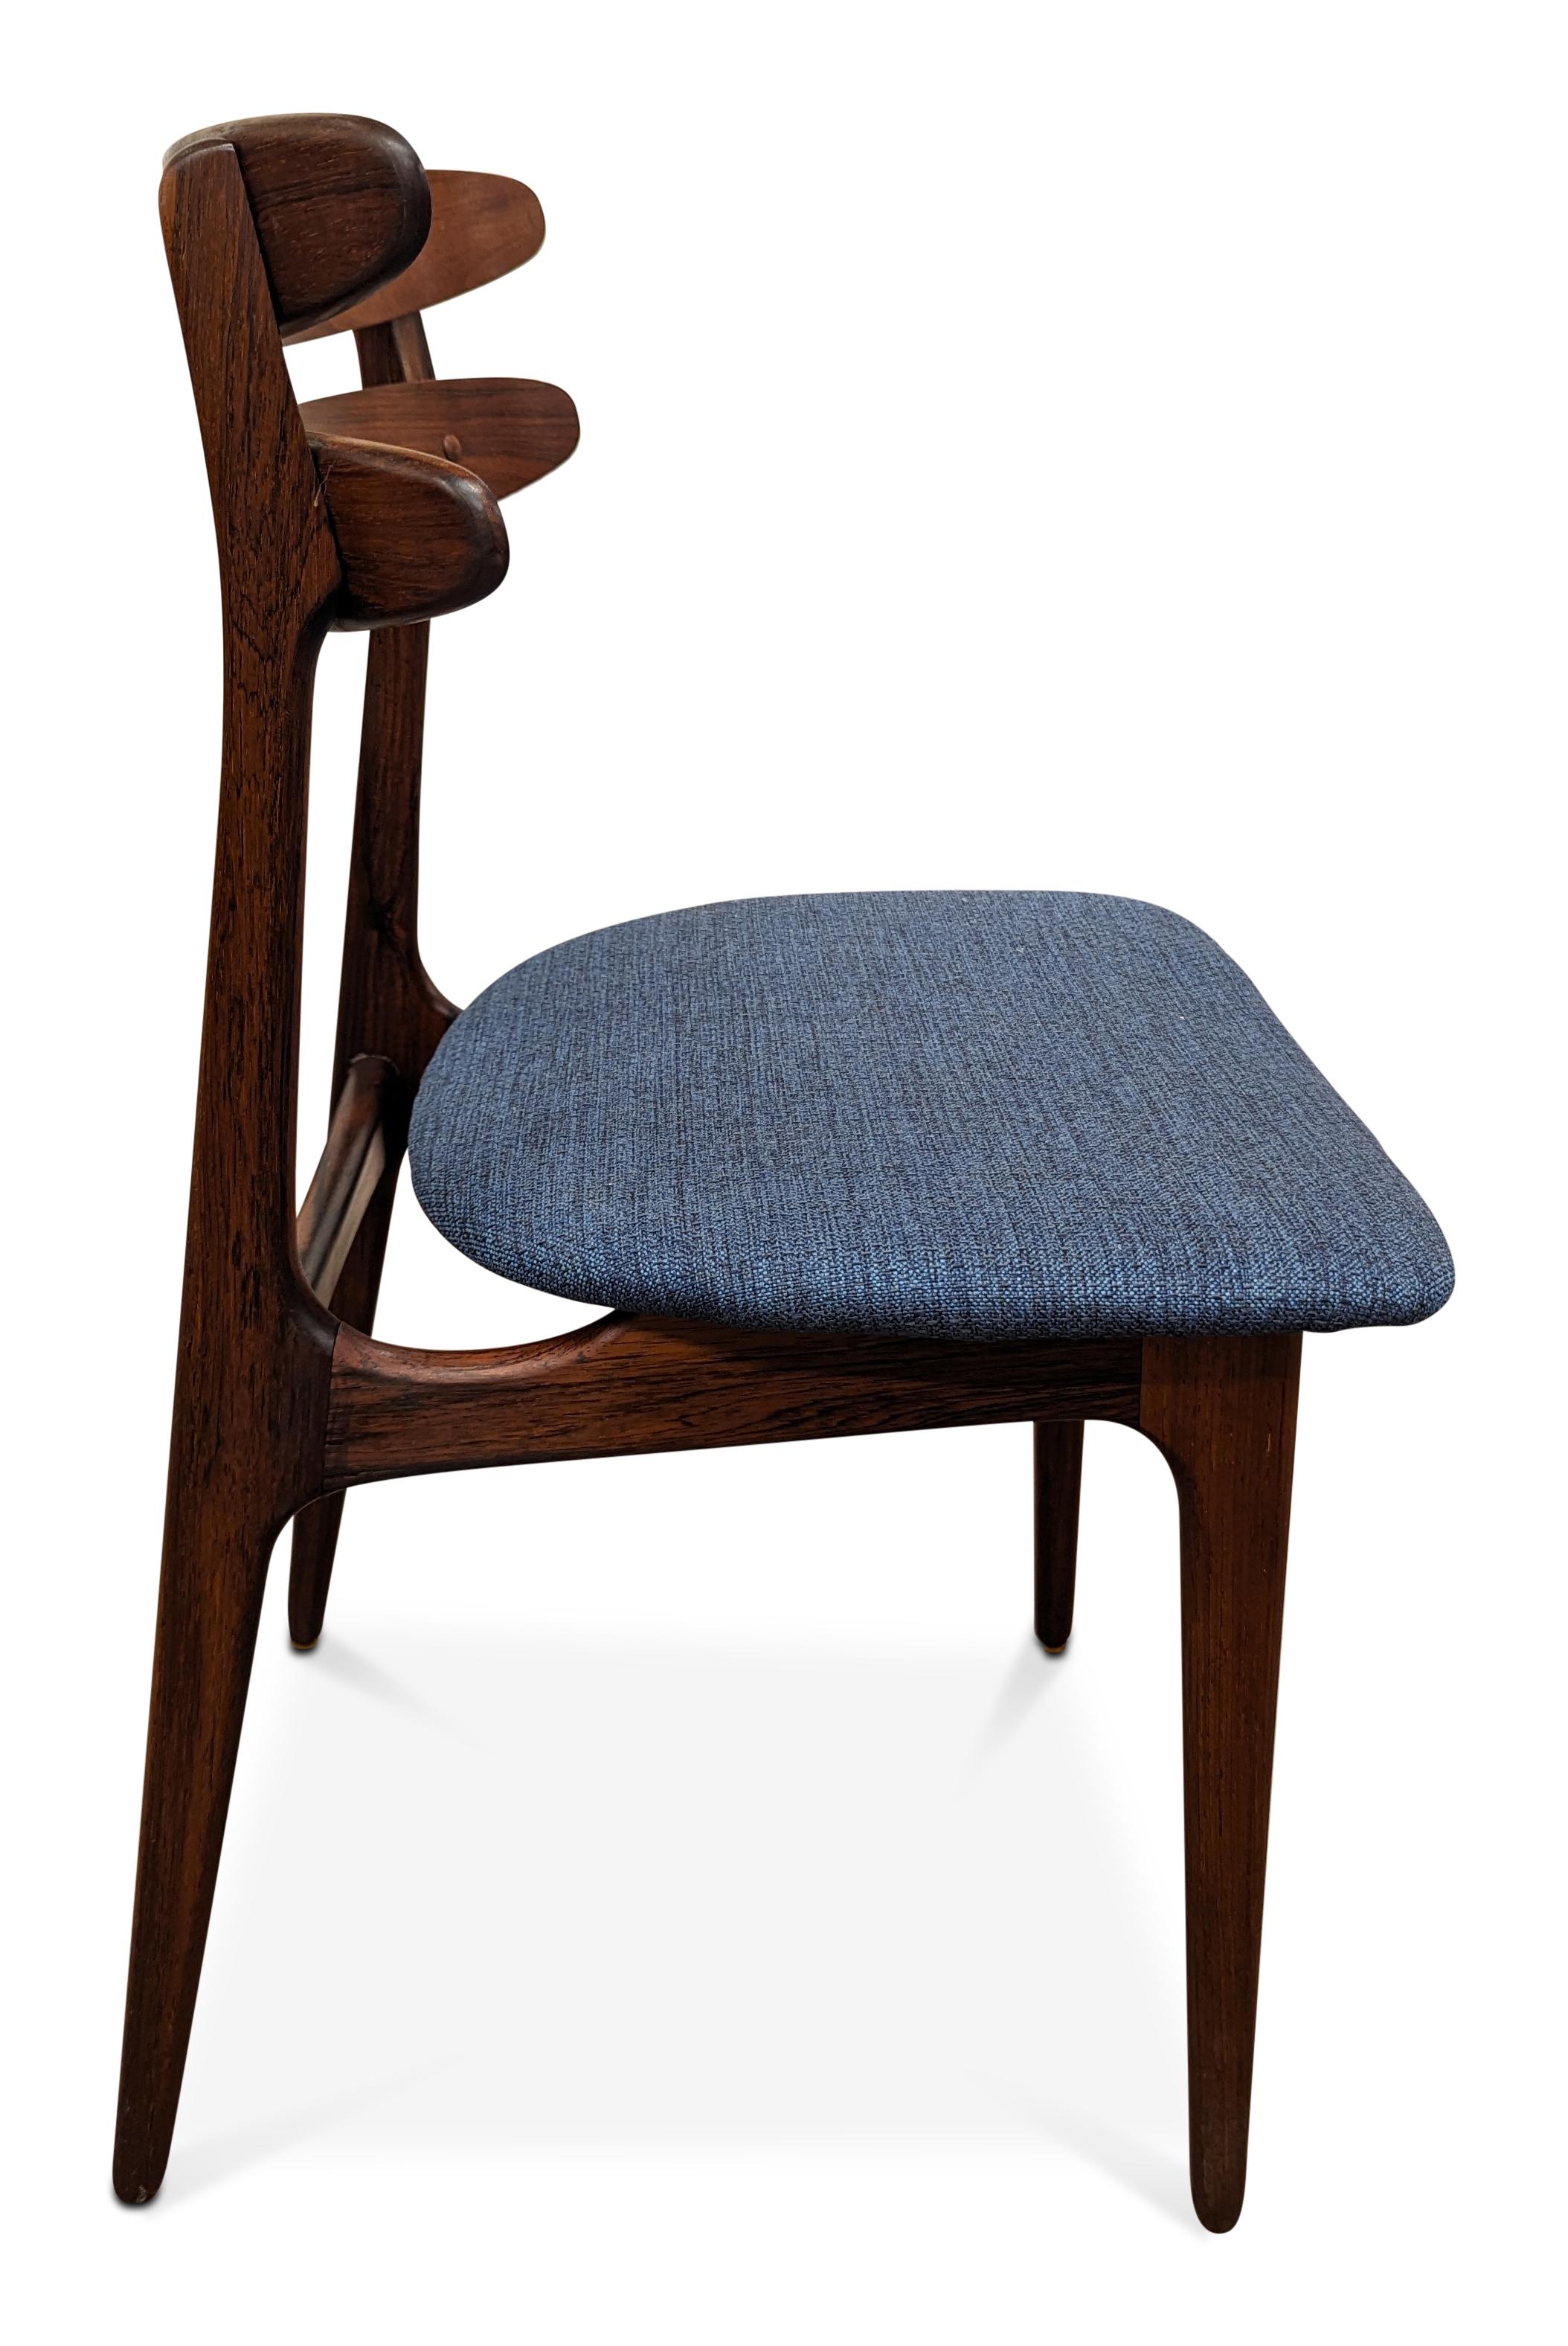 6 Rosewood Dining Chairs - 022483 Vintage Danish Mid Century 1